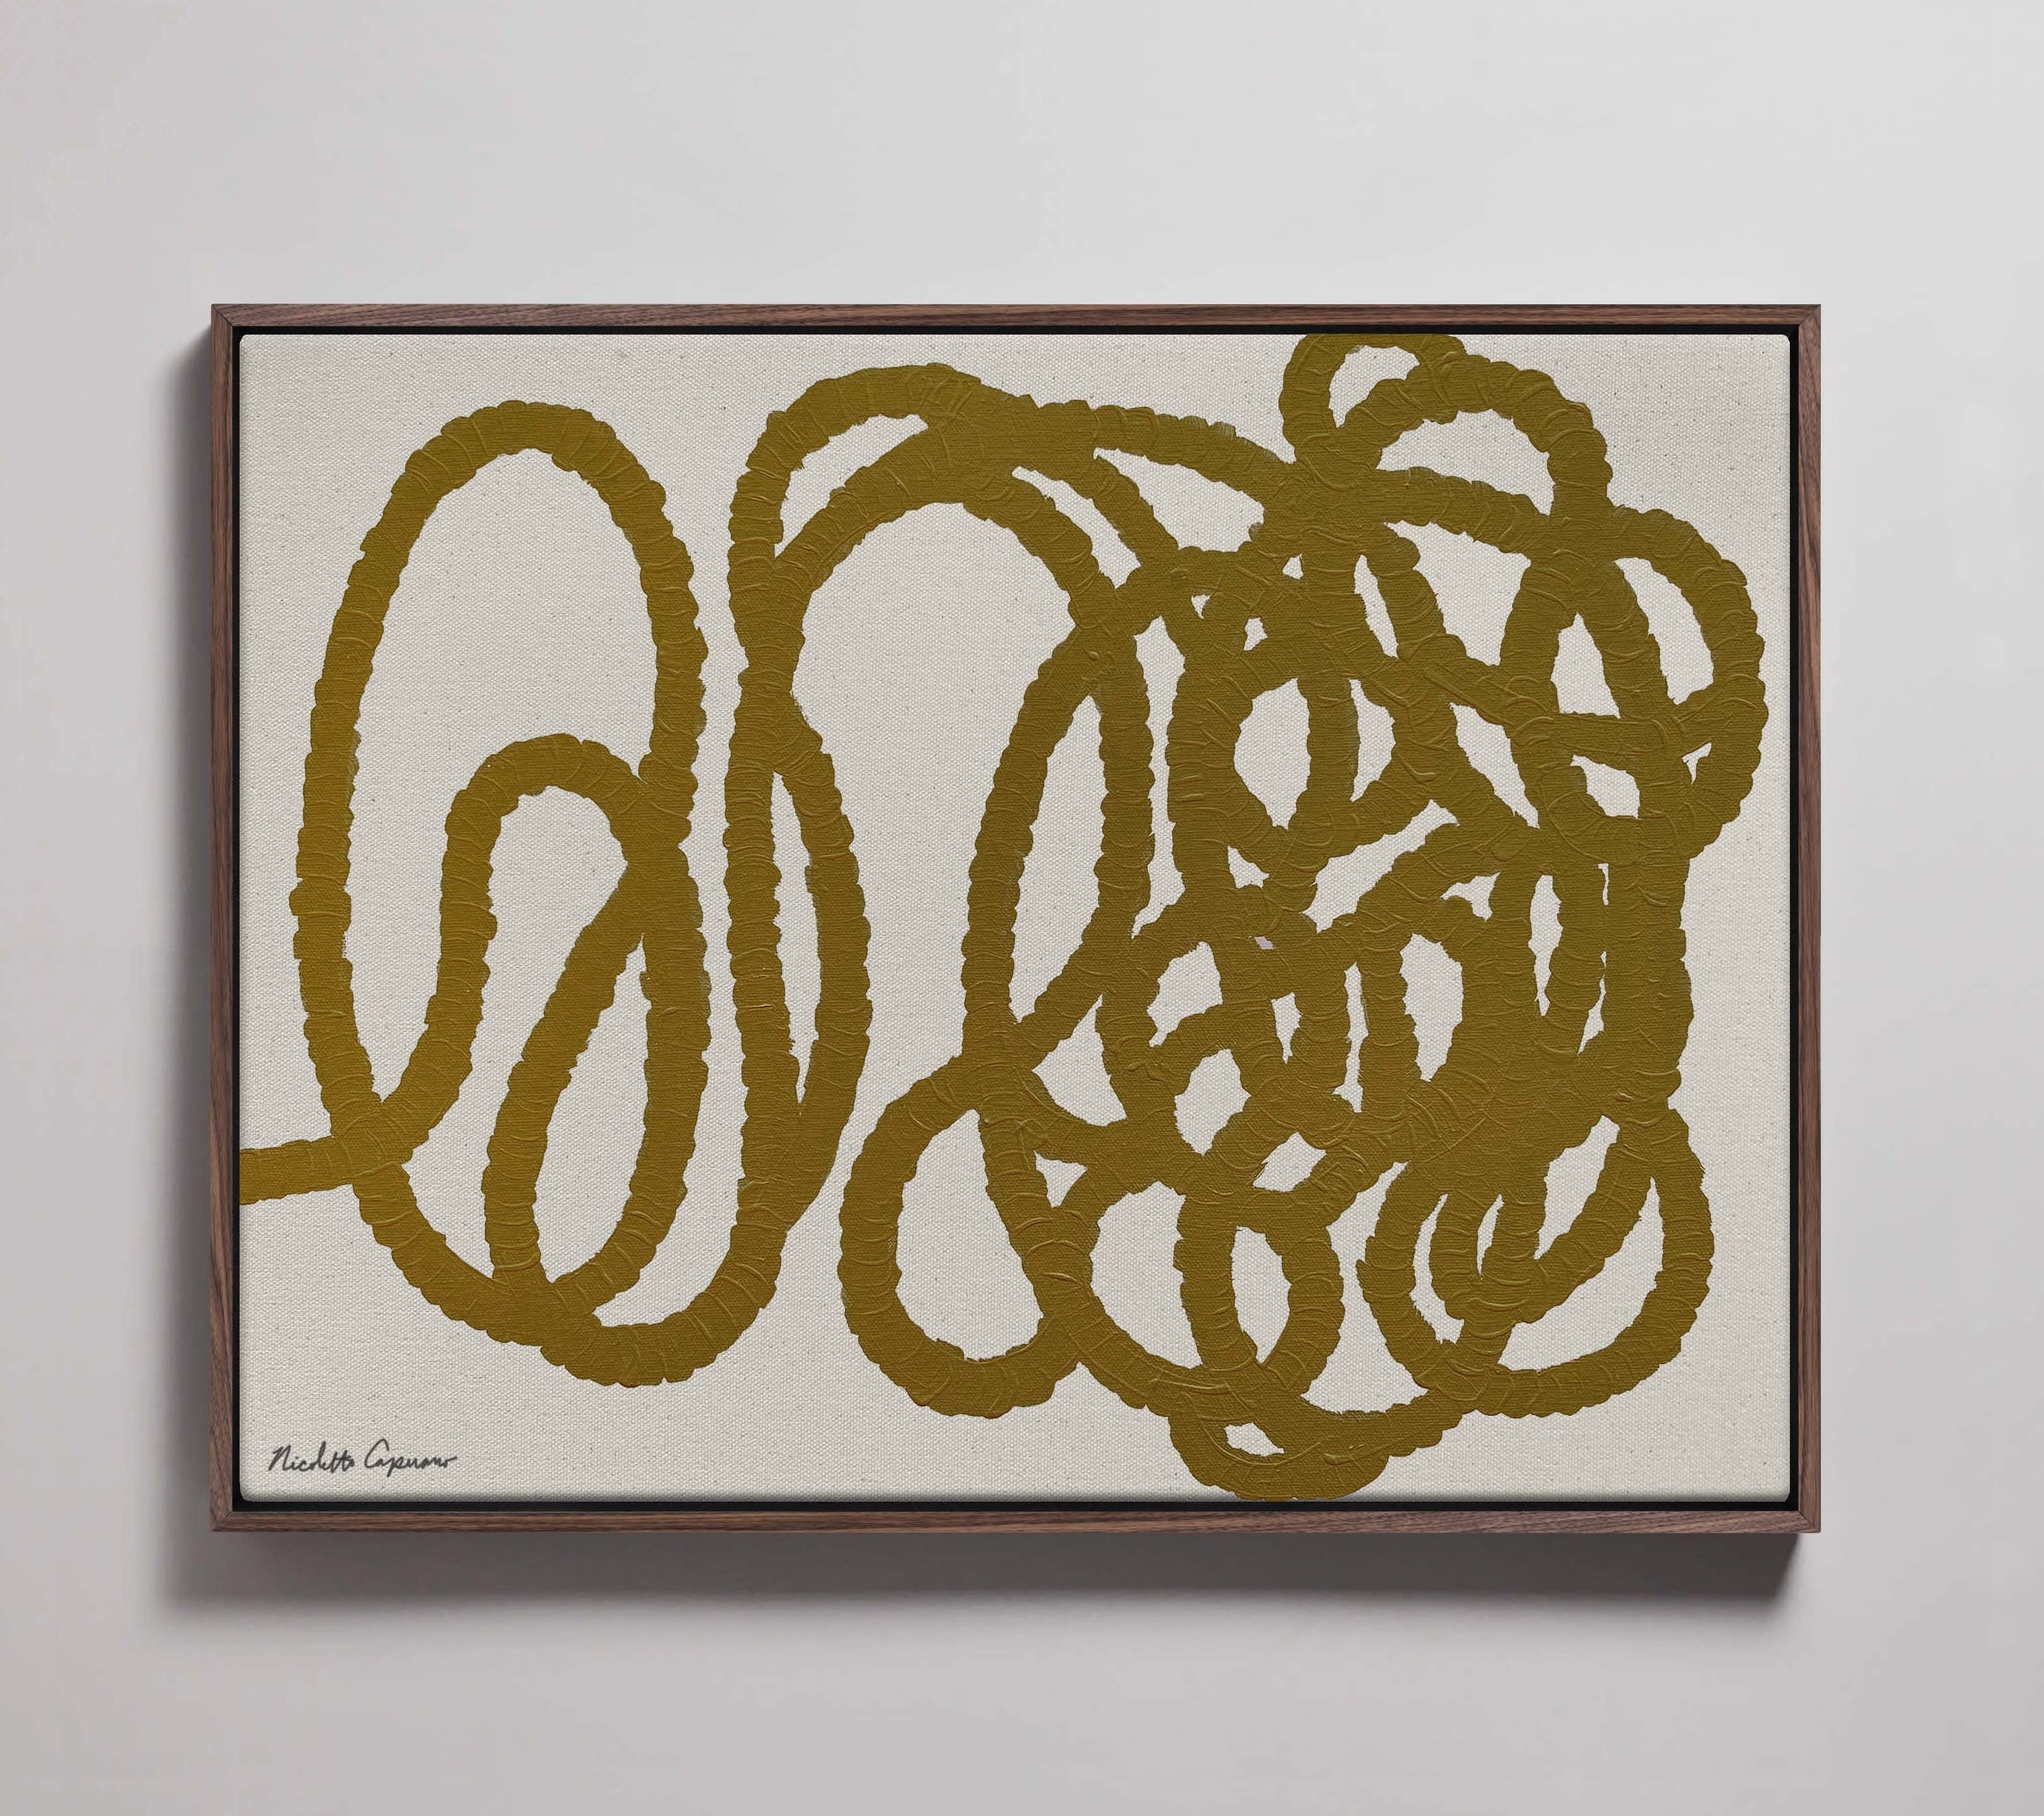 "Abstract Squiggle in Yellow Ochre"